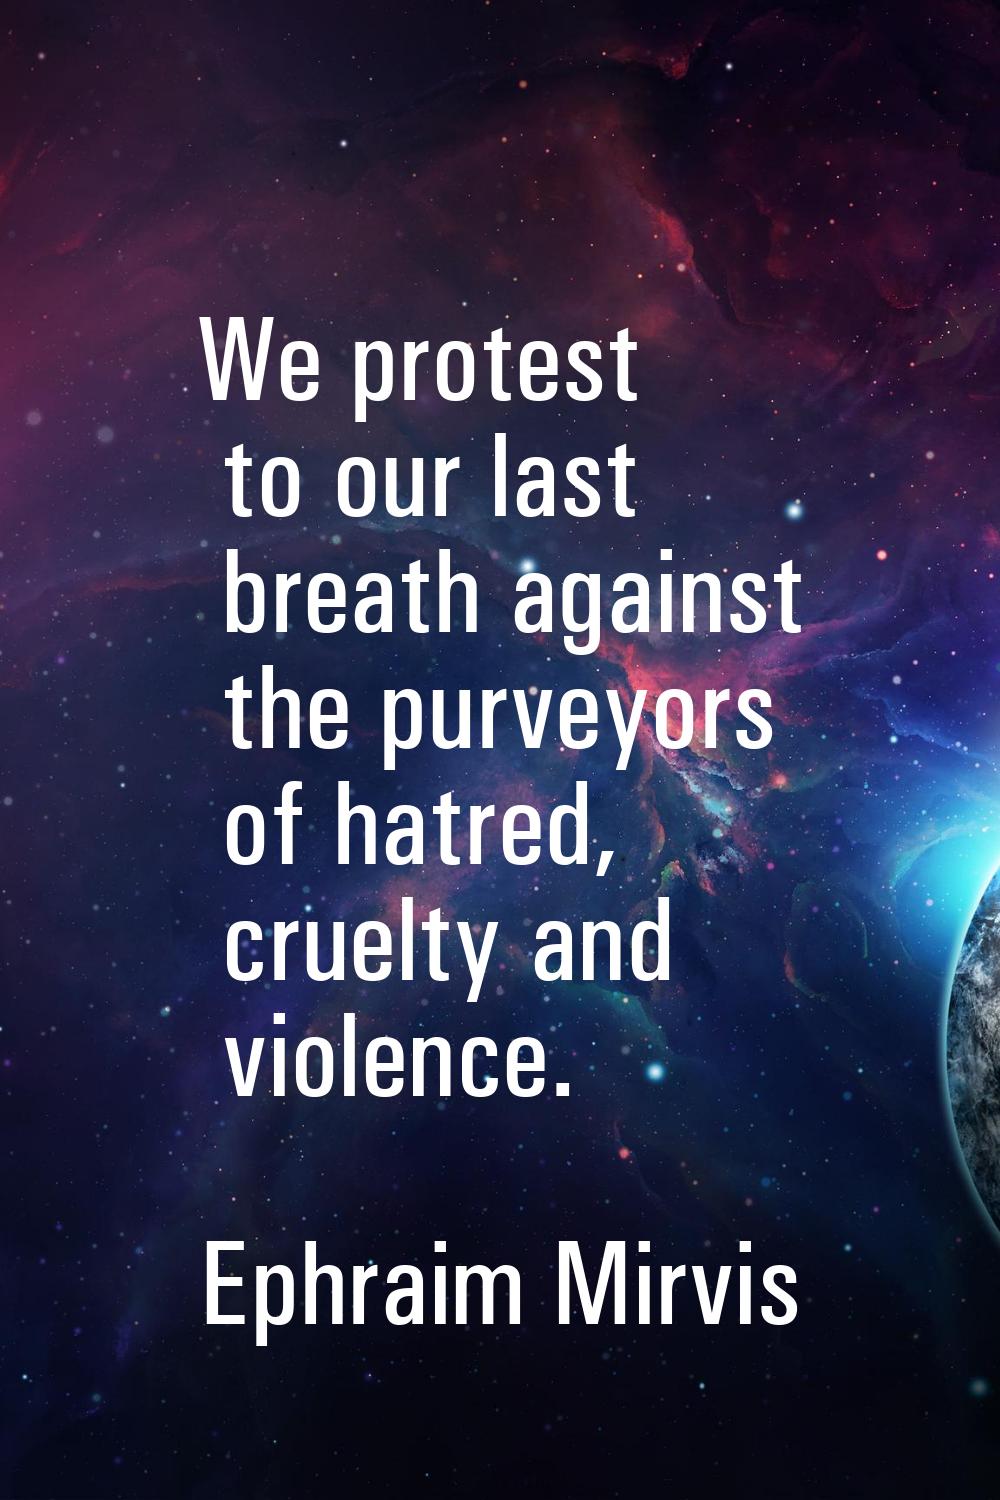 We protest to our last breath against the purveyors of hatred, cruelty and violence.